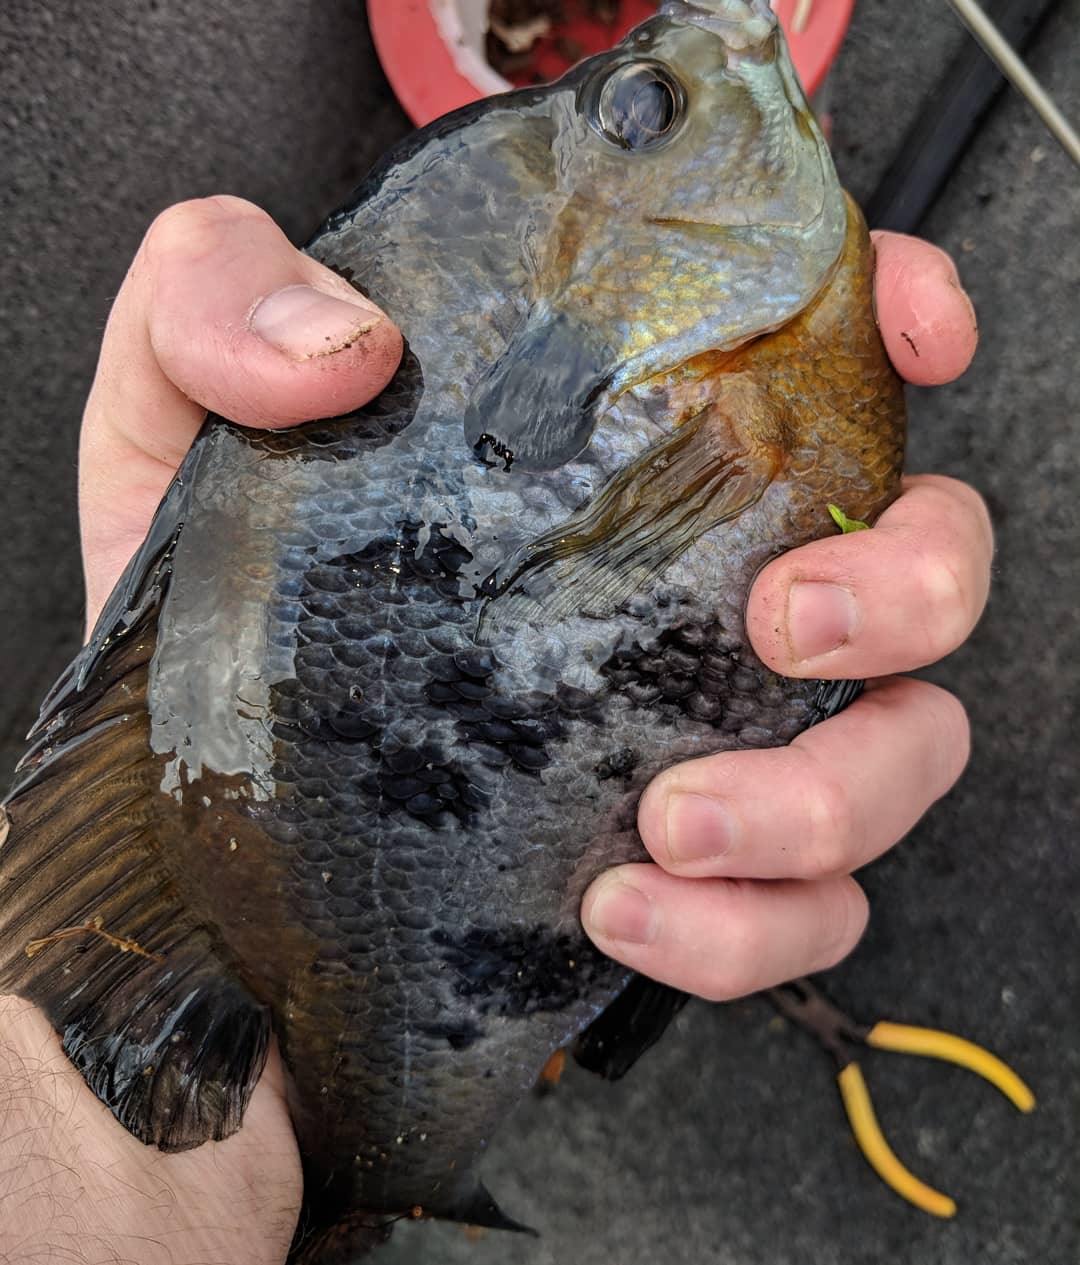 Kayak Bass Fishing- When Owls attack and.. I think I caught me a